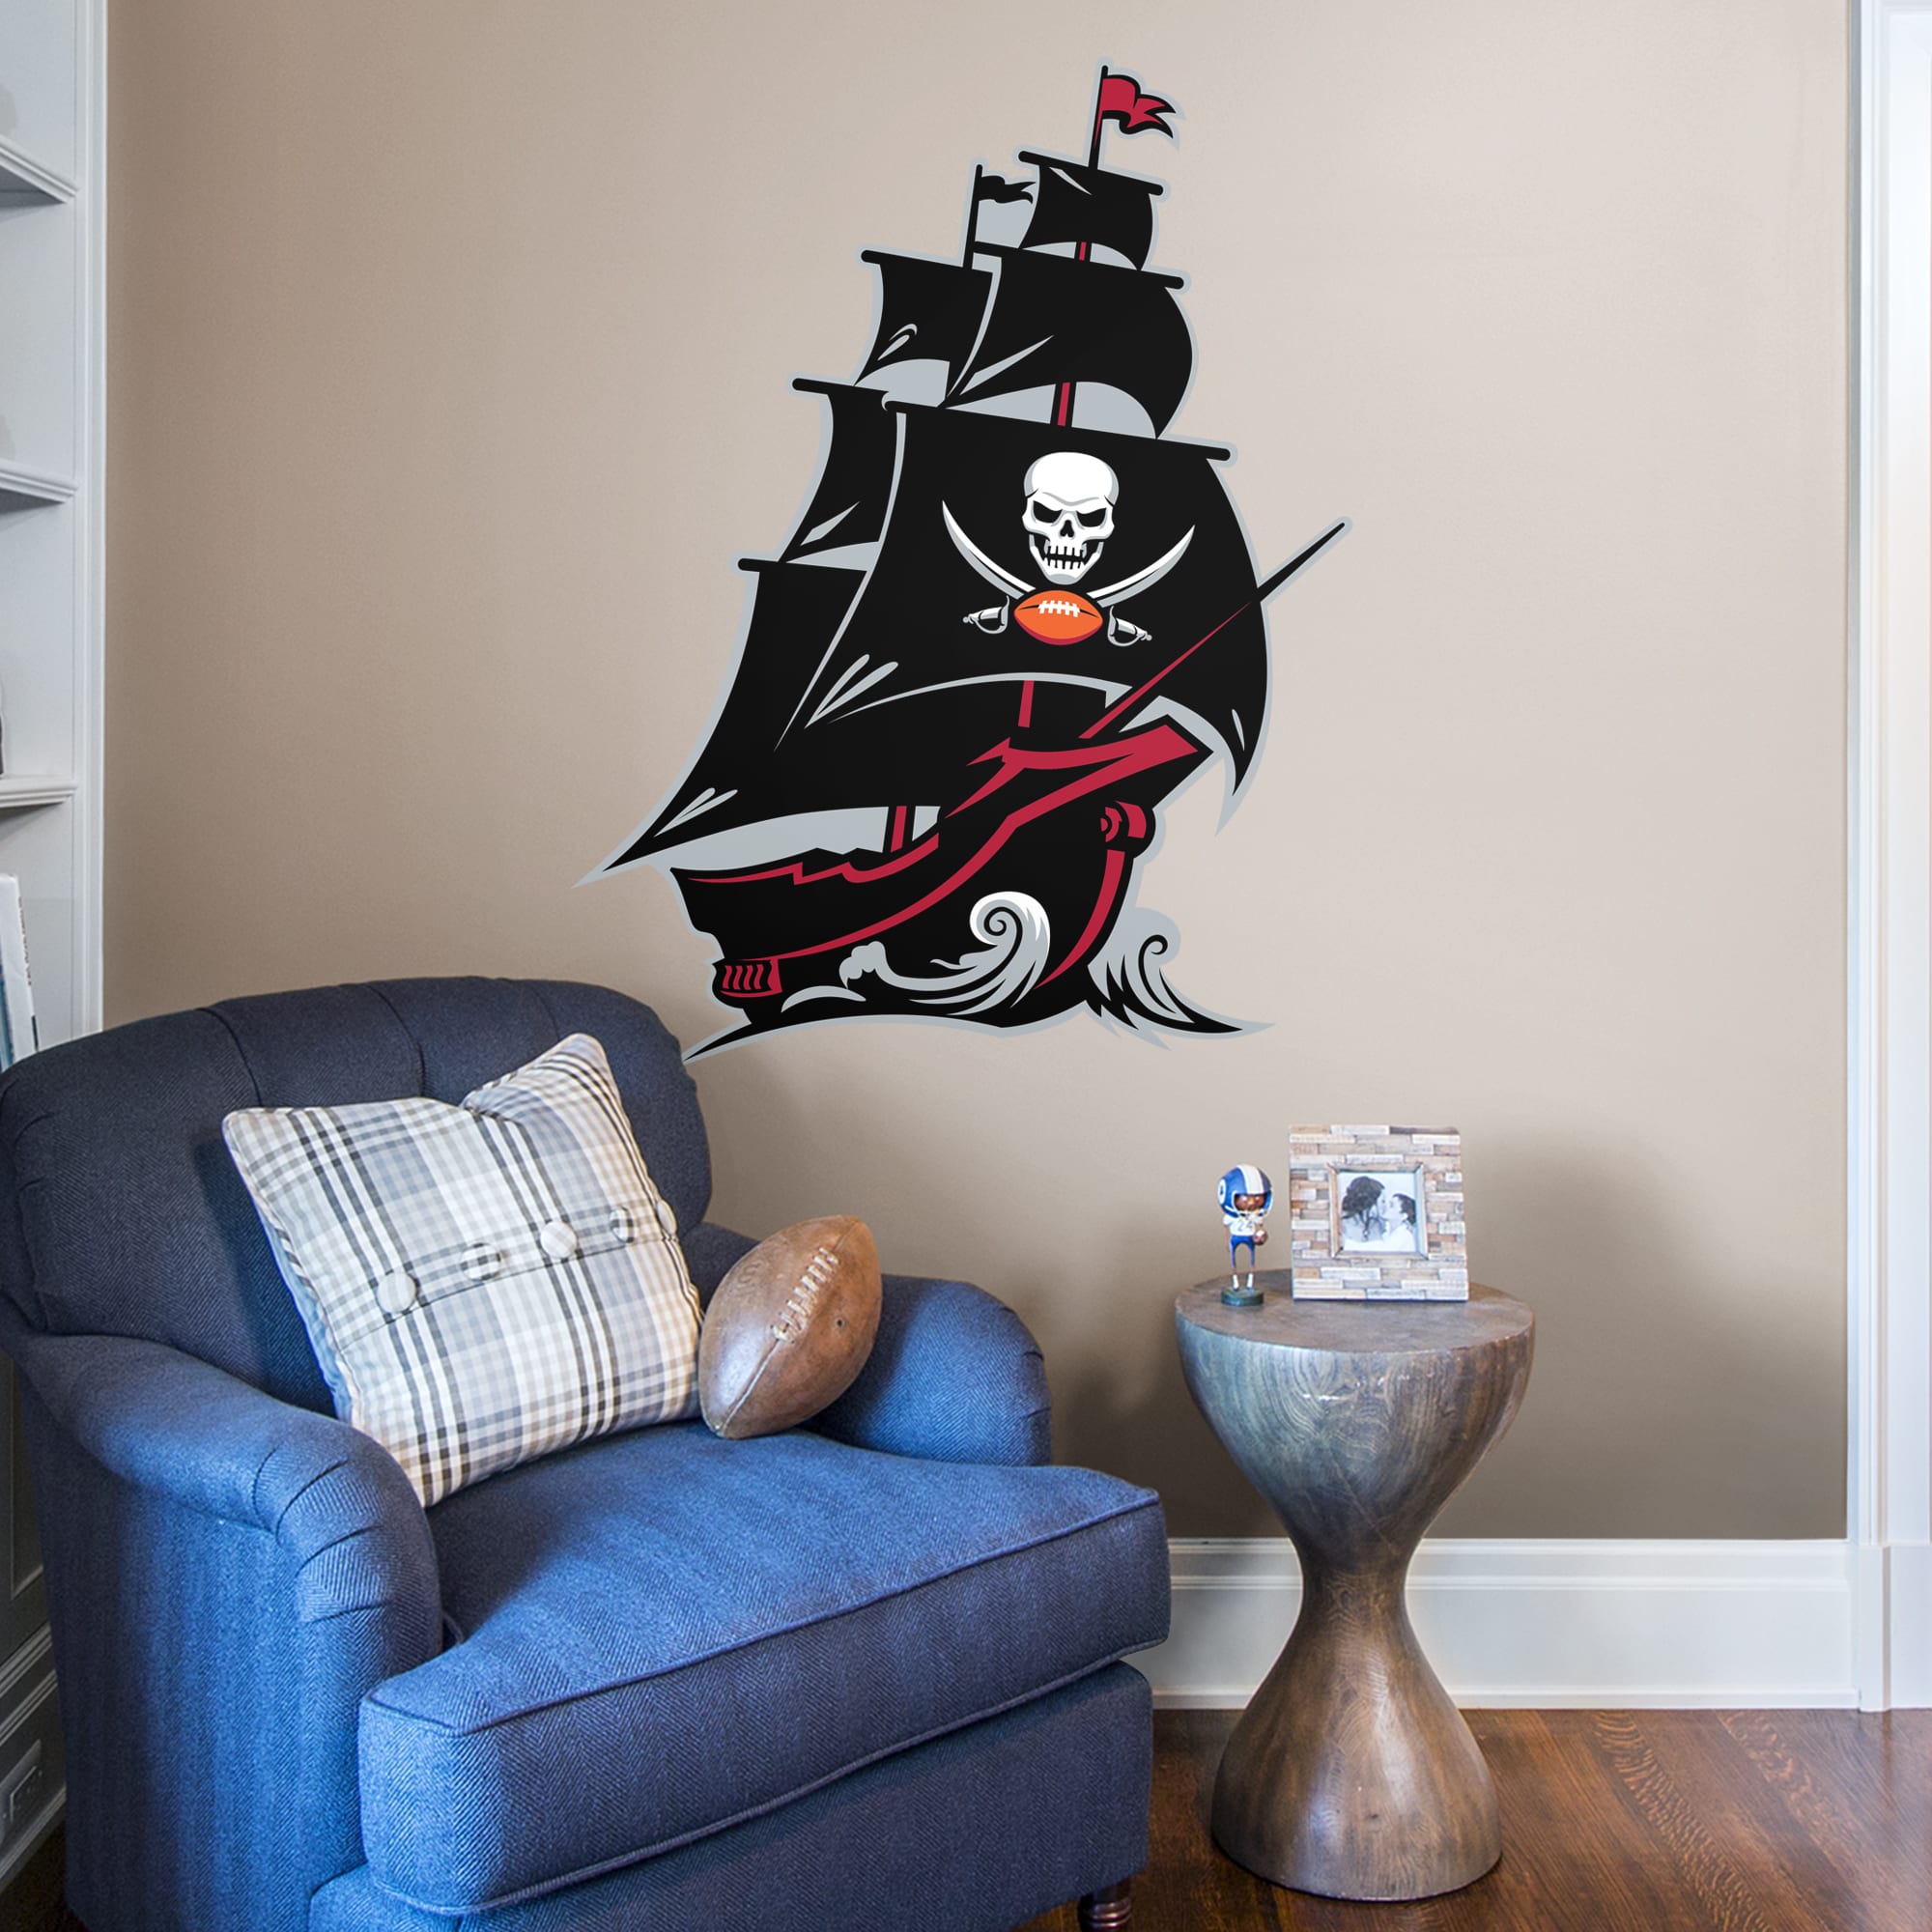 Tampa Bay Buccaneers: Pirate Ship Logo - Officially Licensed NFL Removable Wall Decal Giant Logo + 5 Decals (38.5"W x 50"H) by F